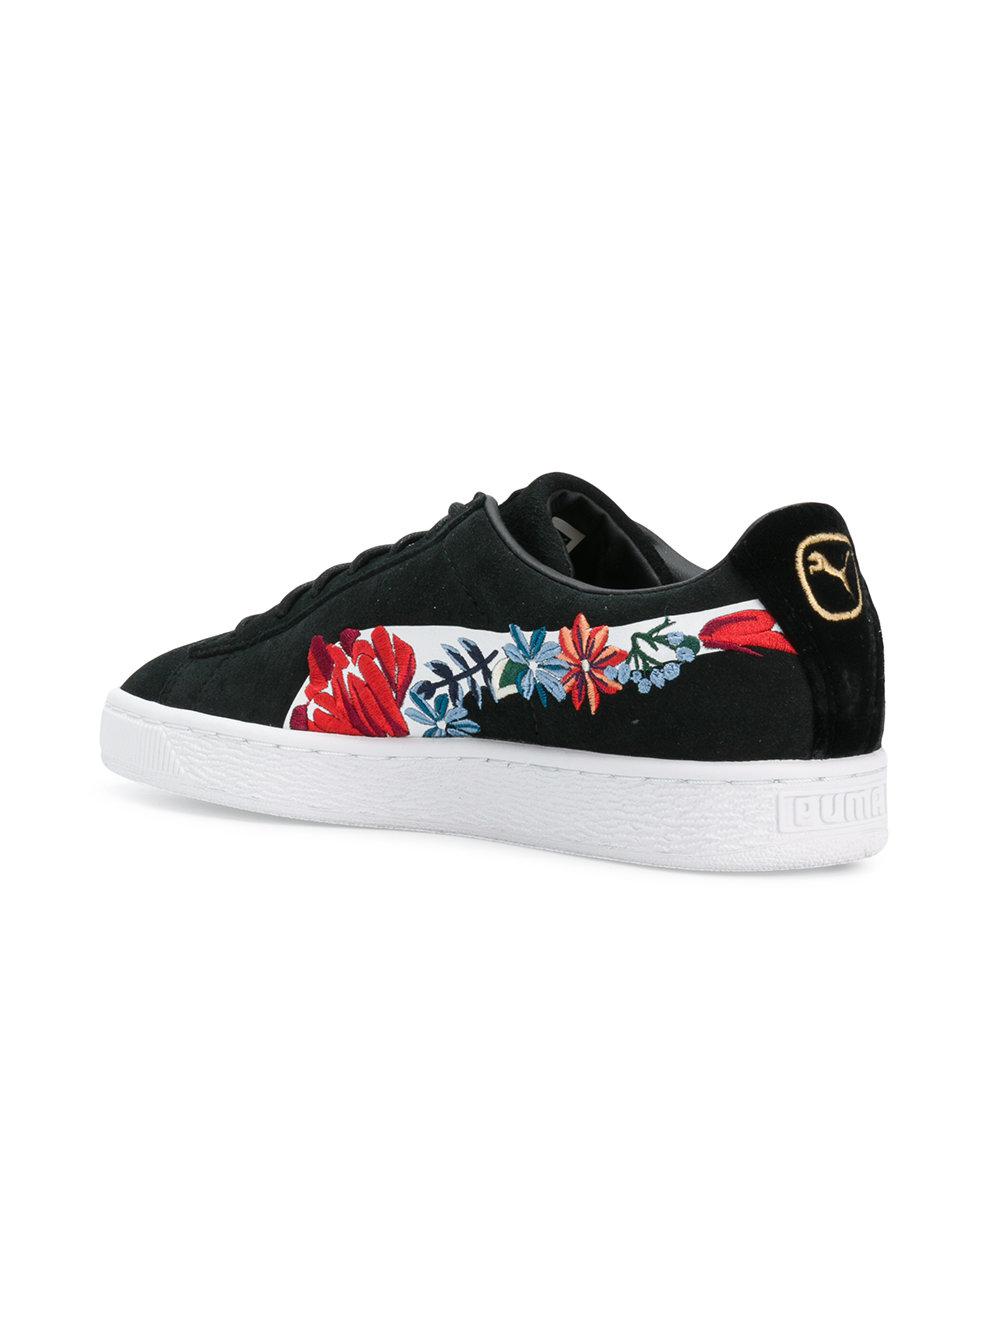 PUMA Hyper Floral Embroidered Sneakers in Black | Lyst UK